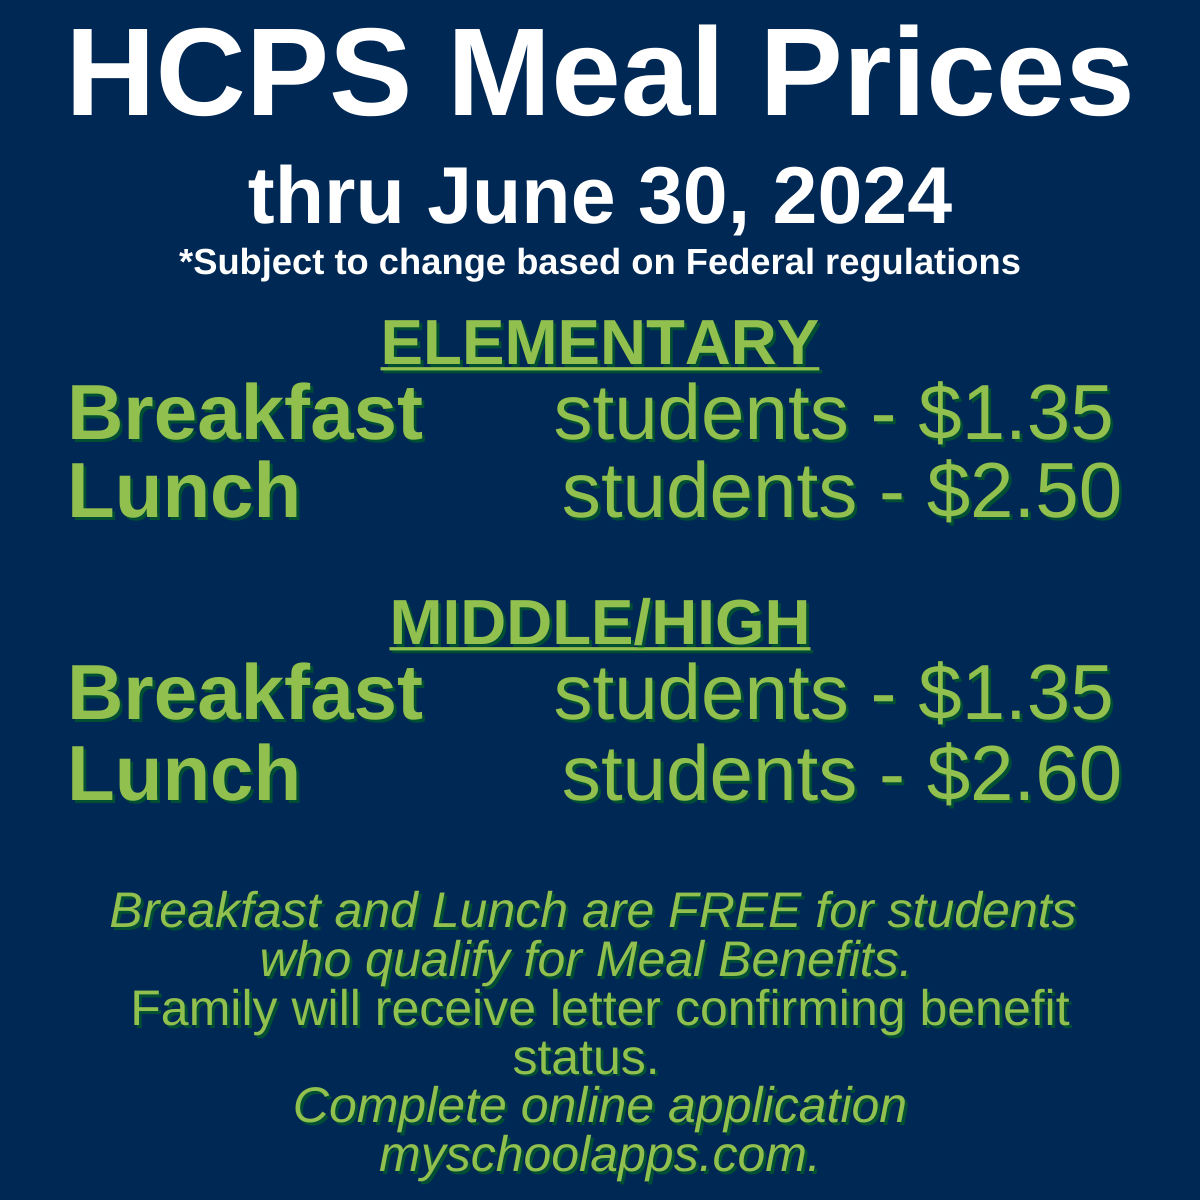 HCPS Meal prices through June 30 2024 Elementary Breakfast $1.35 Elementary Lunch $2.50 Middle High breakfast $1.35 Middle High lunch $2.60. Free breakfast and lunch for students who qualify for Meal Benefits